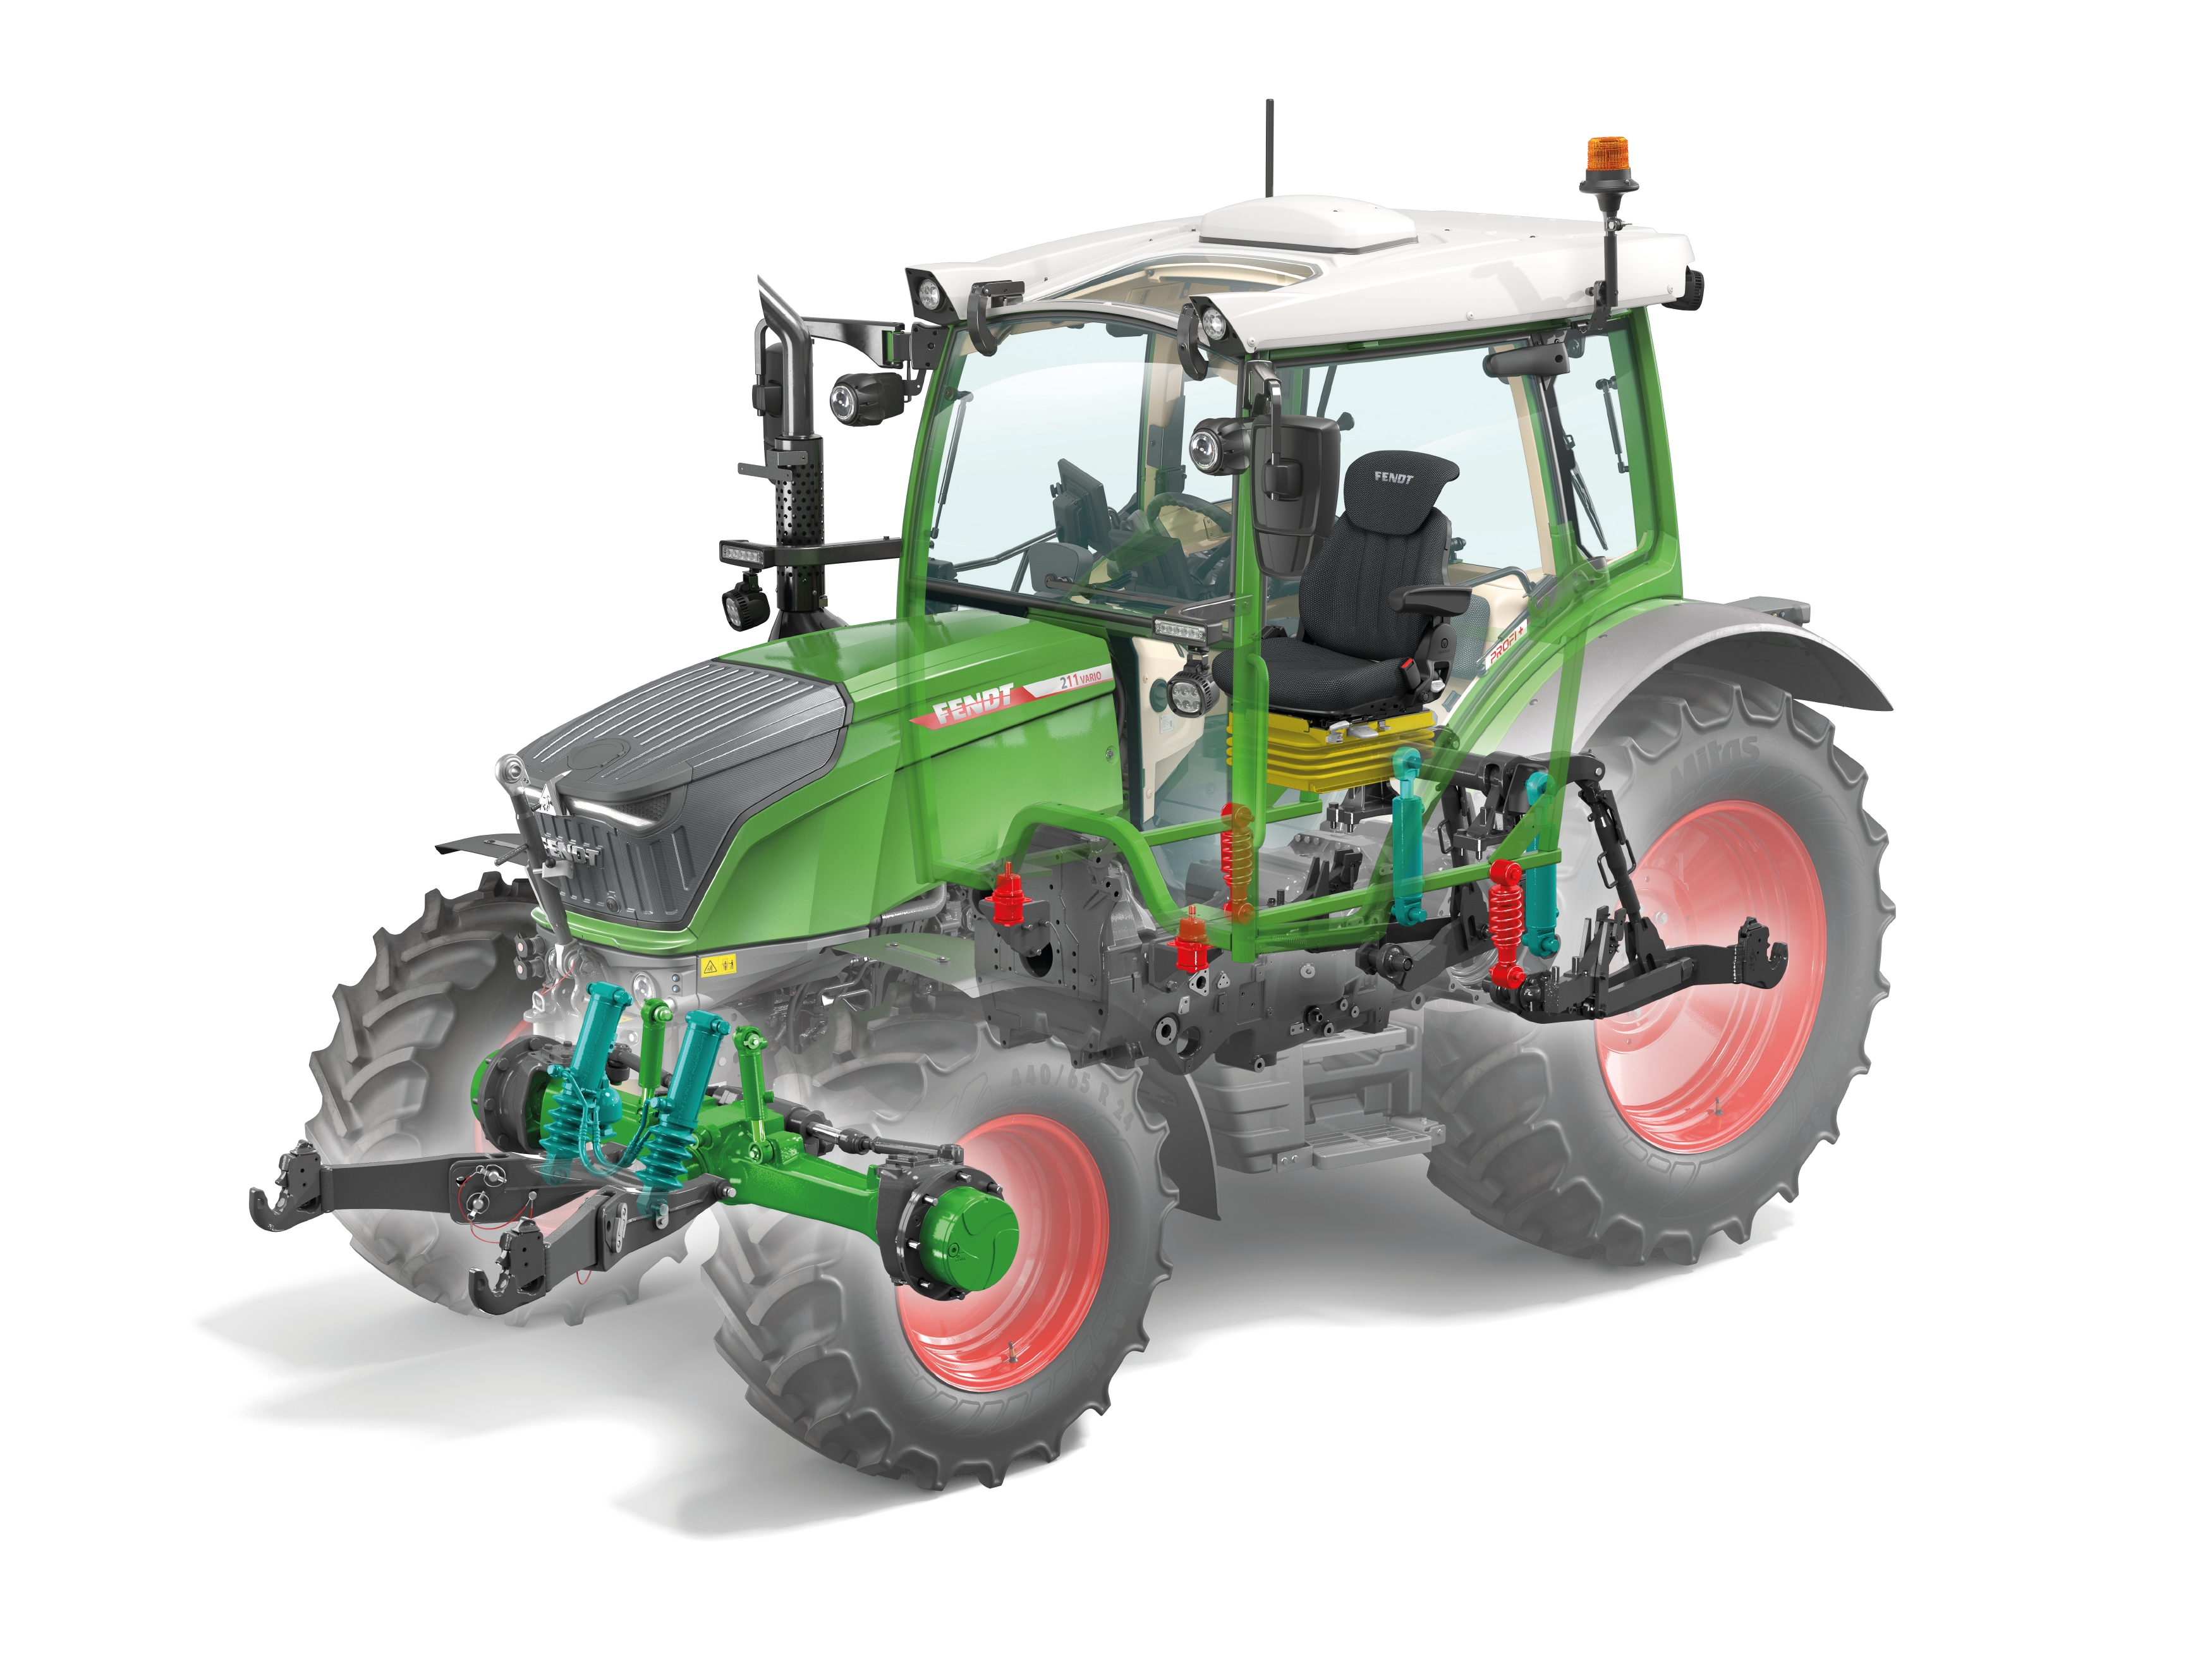 Continental Components Ensure Truck-level Ride Comfort in Compact Tractors  from Fendt - Continental AG